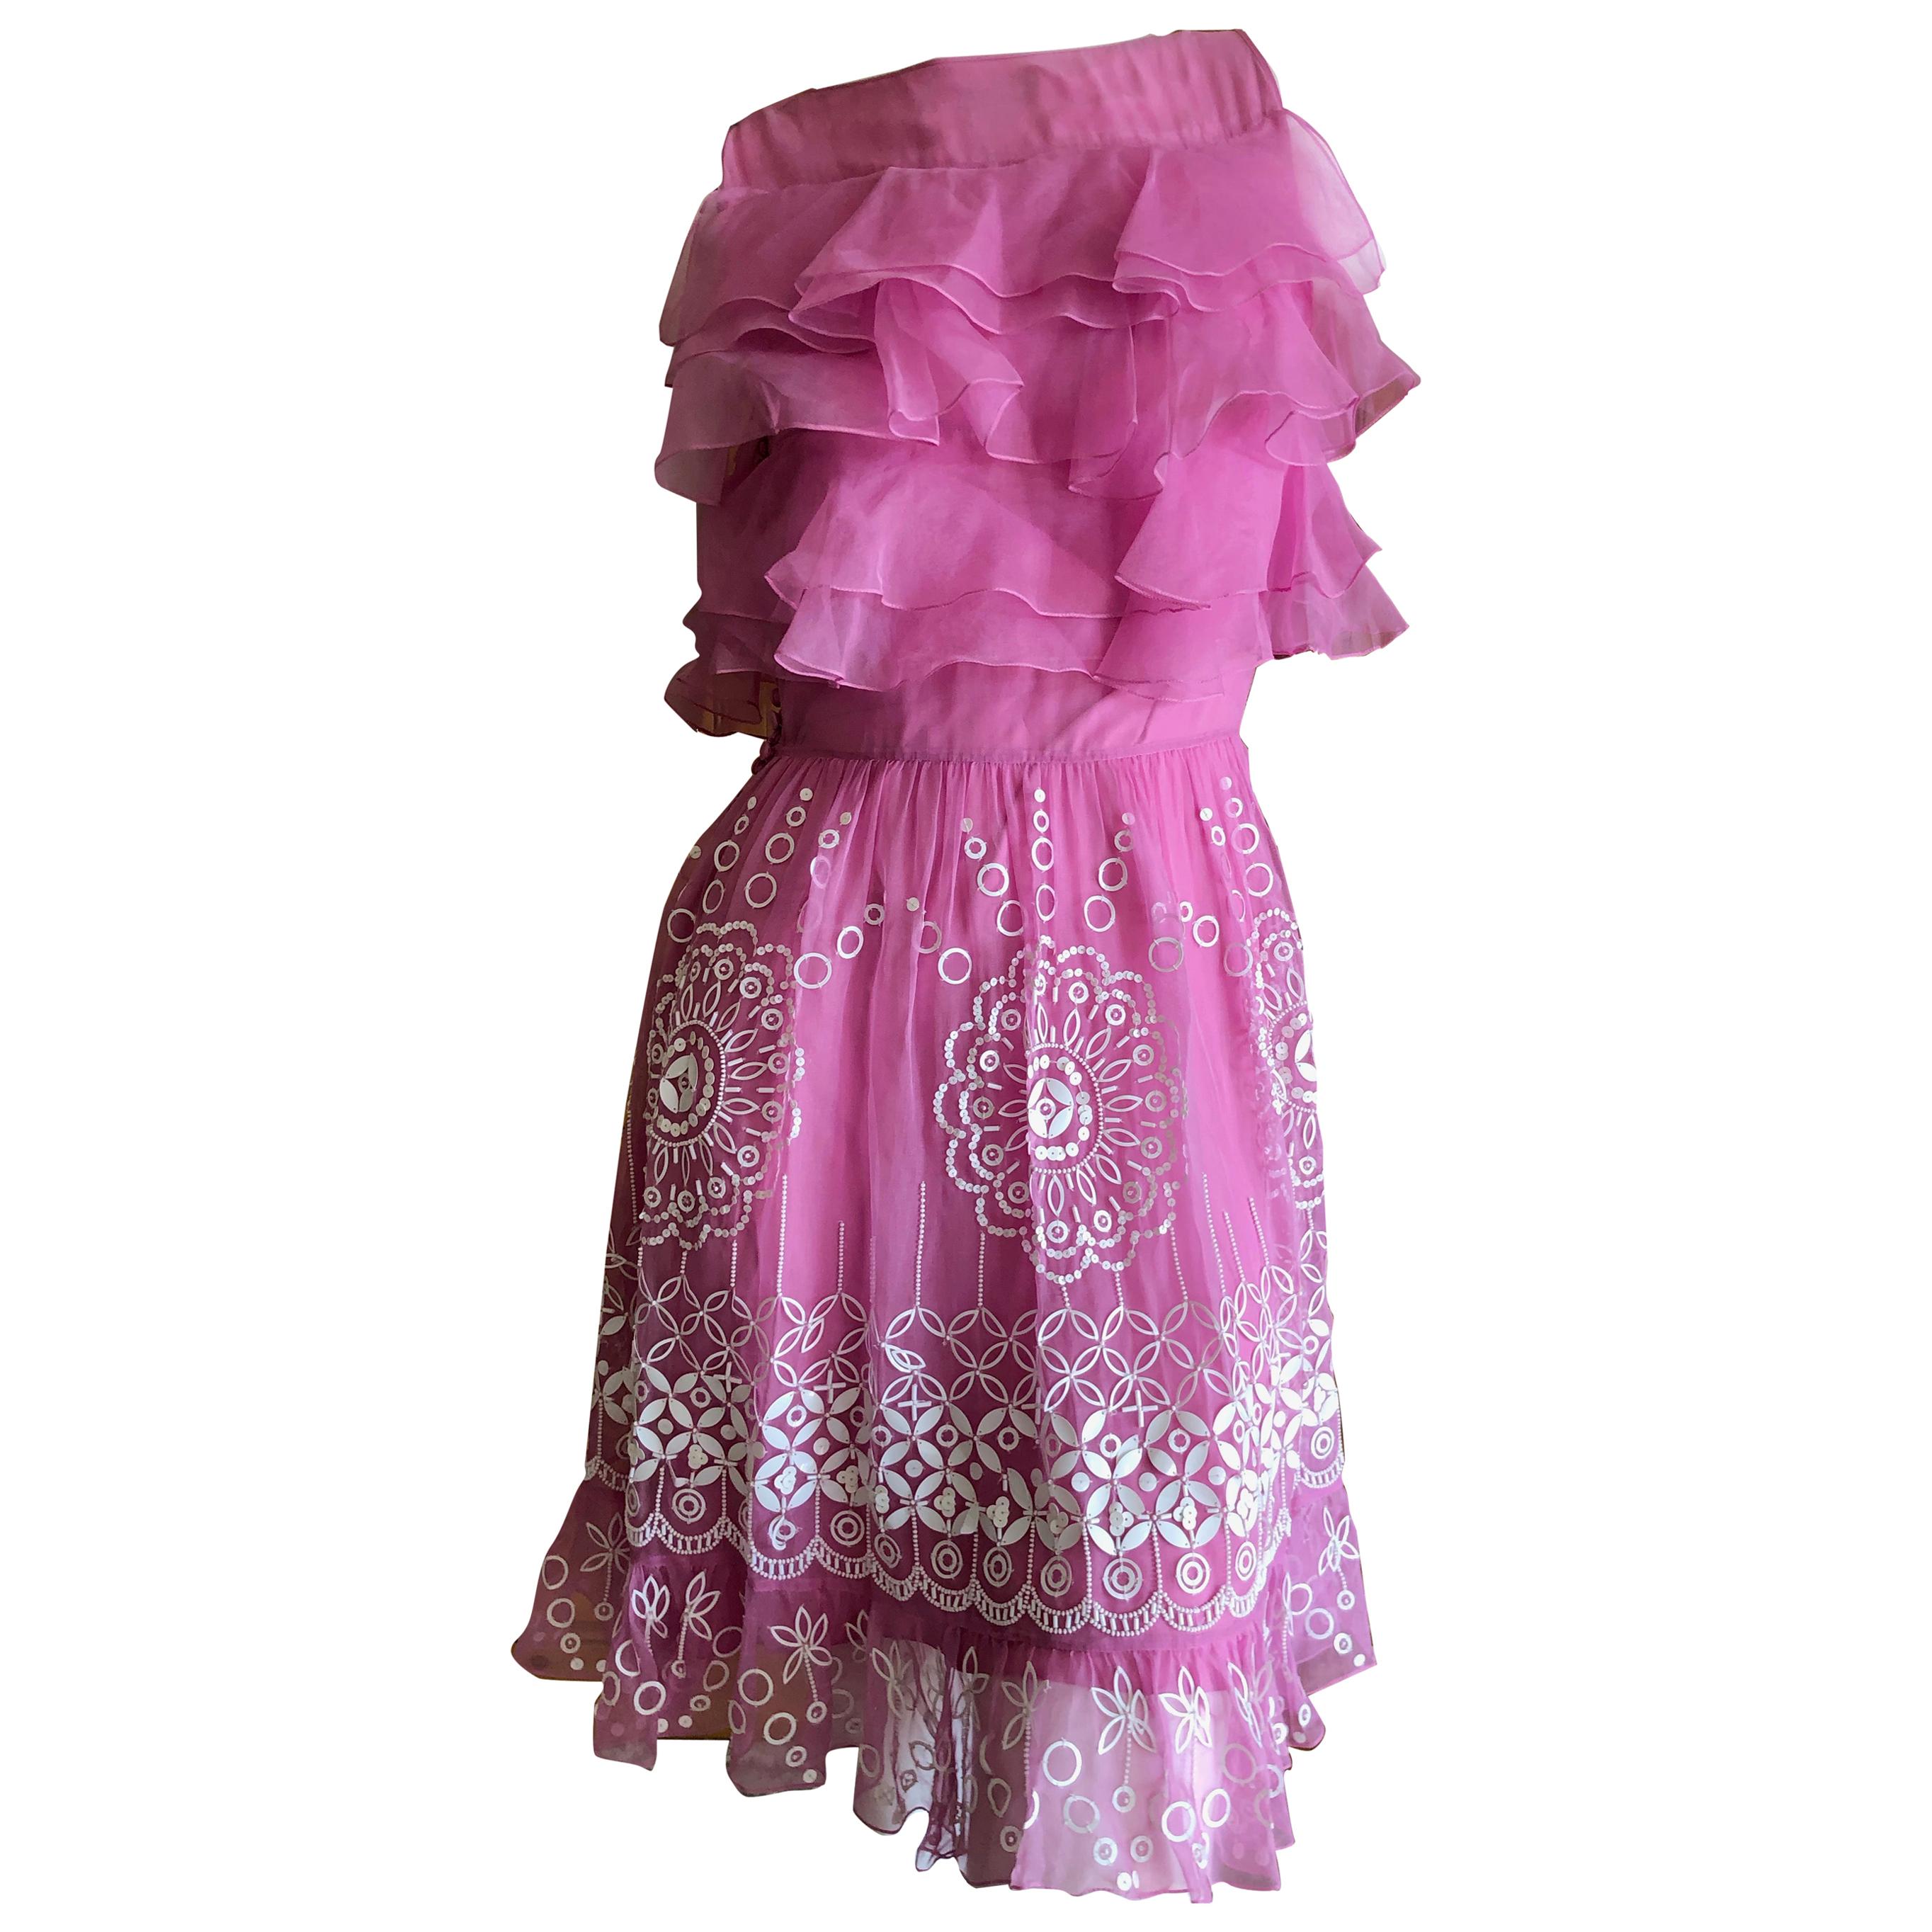 Christian Dior by John Galliano Pink Silk Dress with White Embellishments For Sale